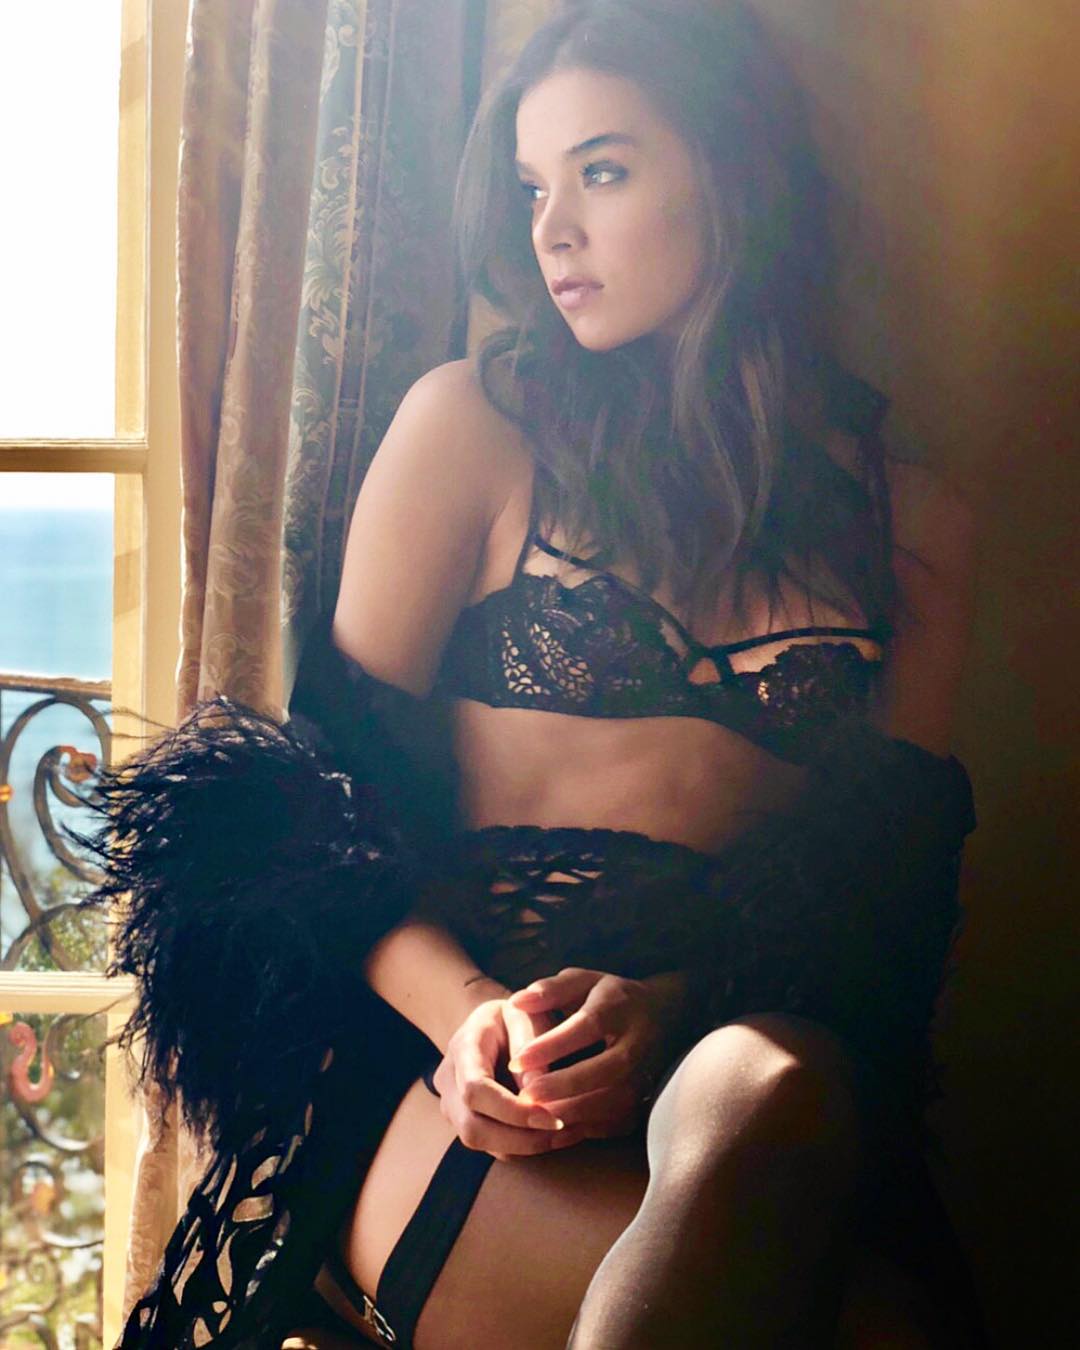 Slutty Hailee Steinfeld Pictures, Including Raunchy Bikini Pictures and Lingerie Shots